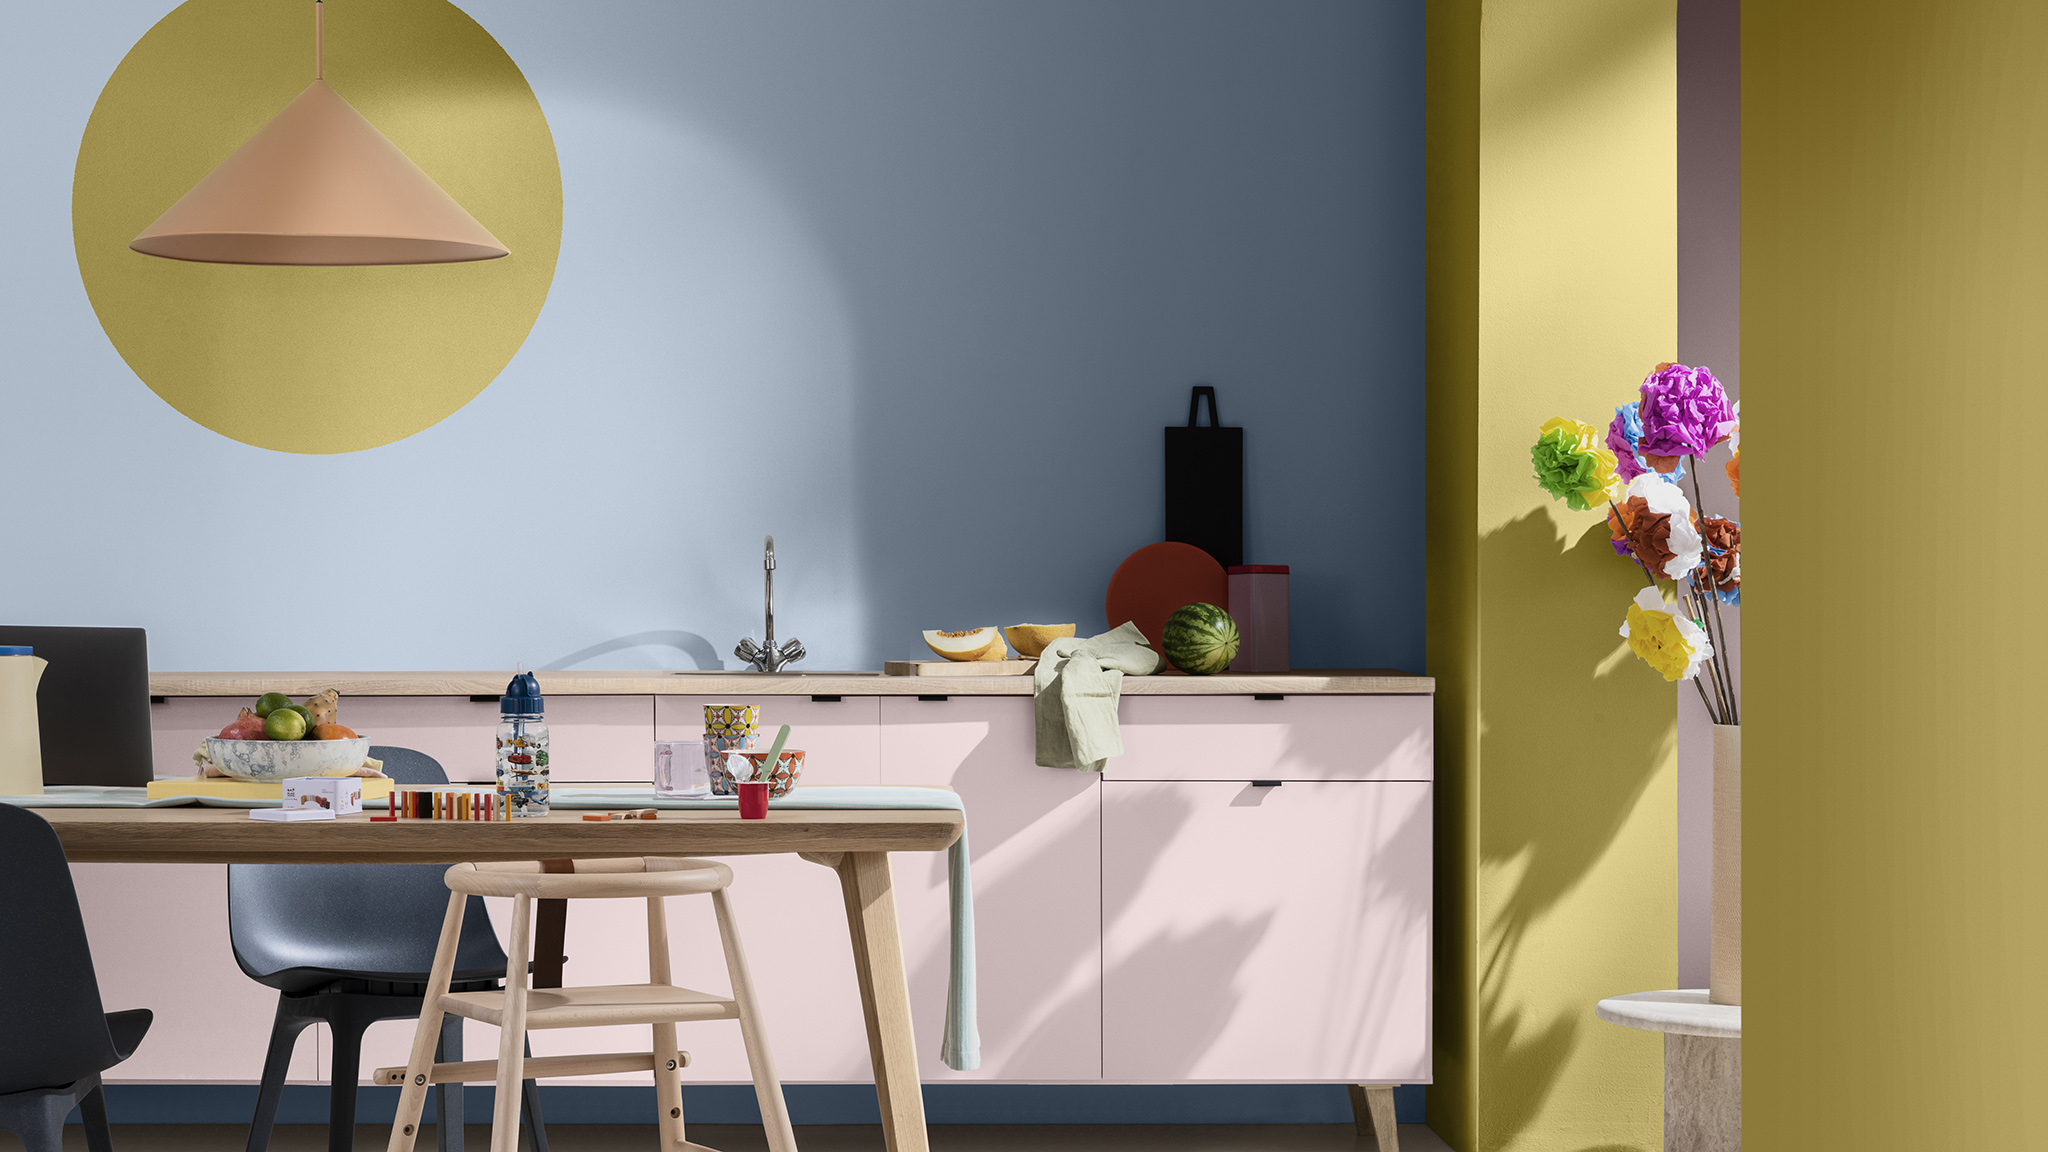 dulux-colour-futures-colour-of-the-year-2022-the-workshop-colours-kitchen-inspiration-global-31.jpg